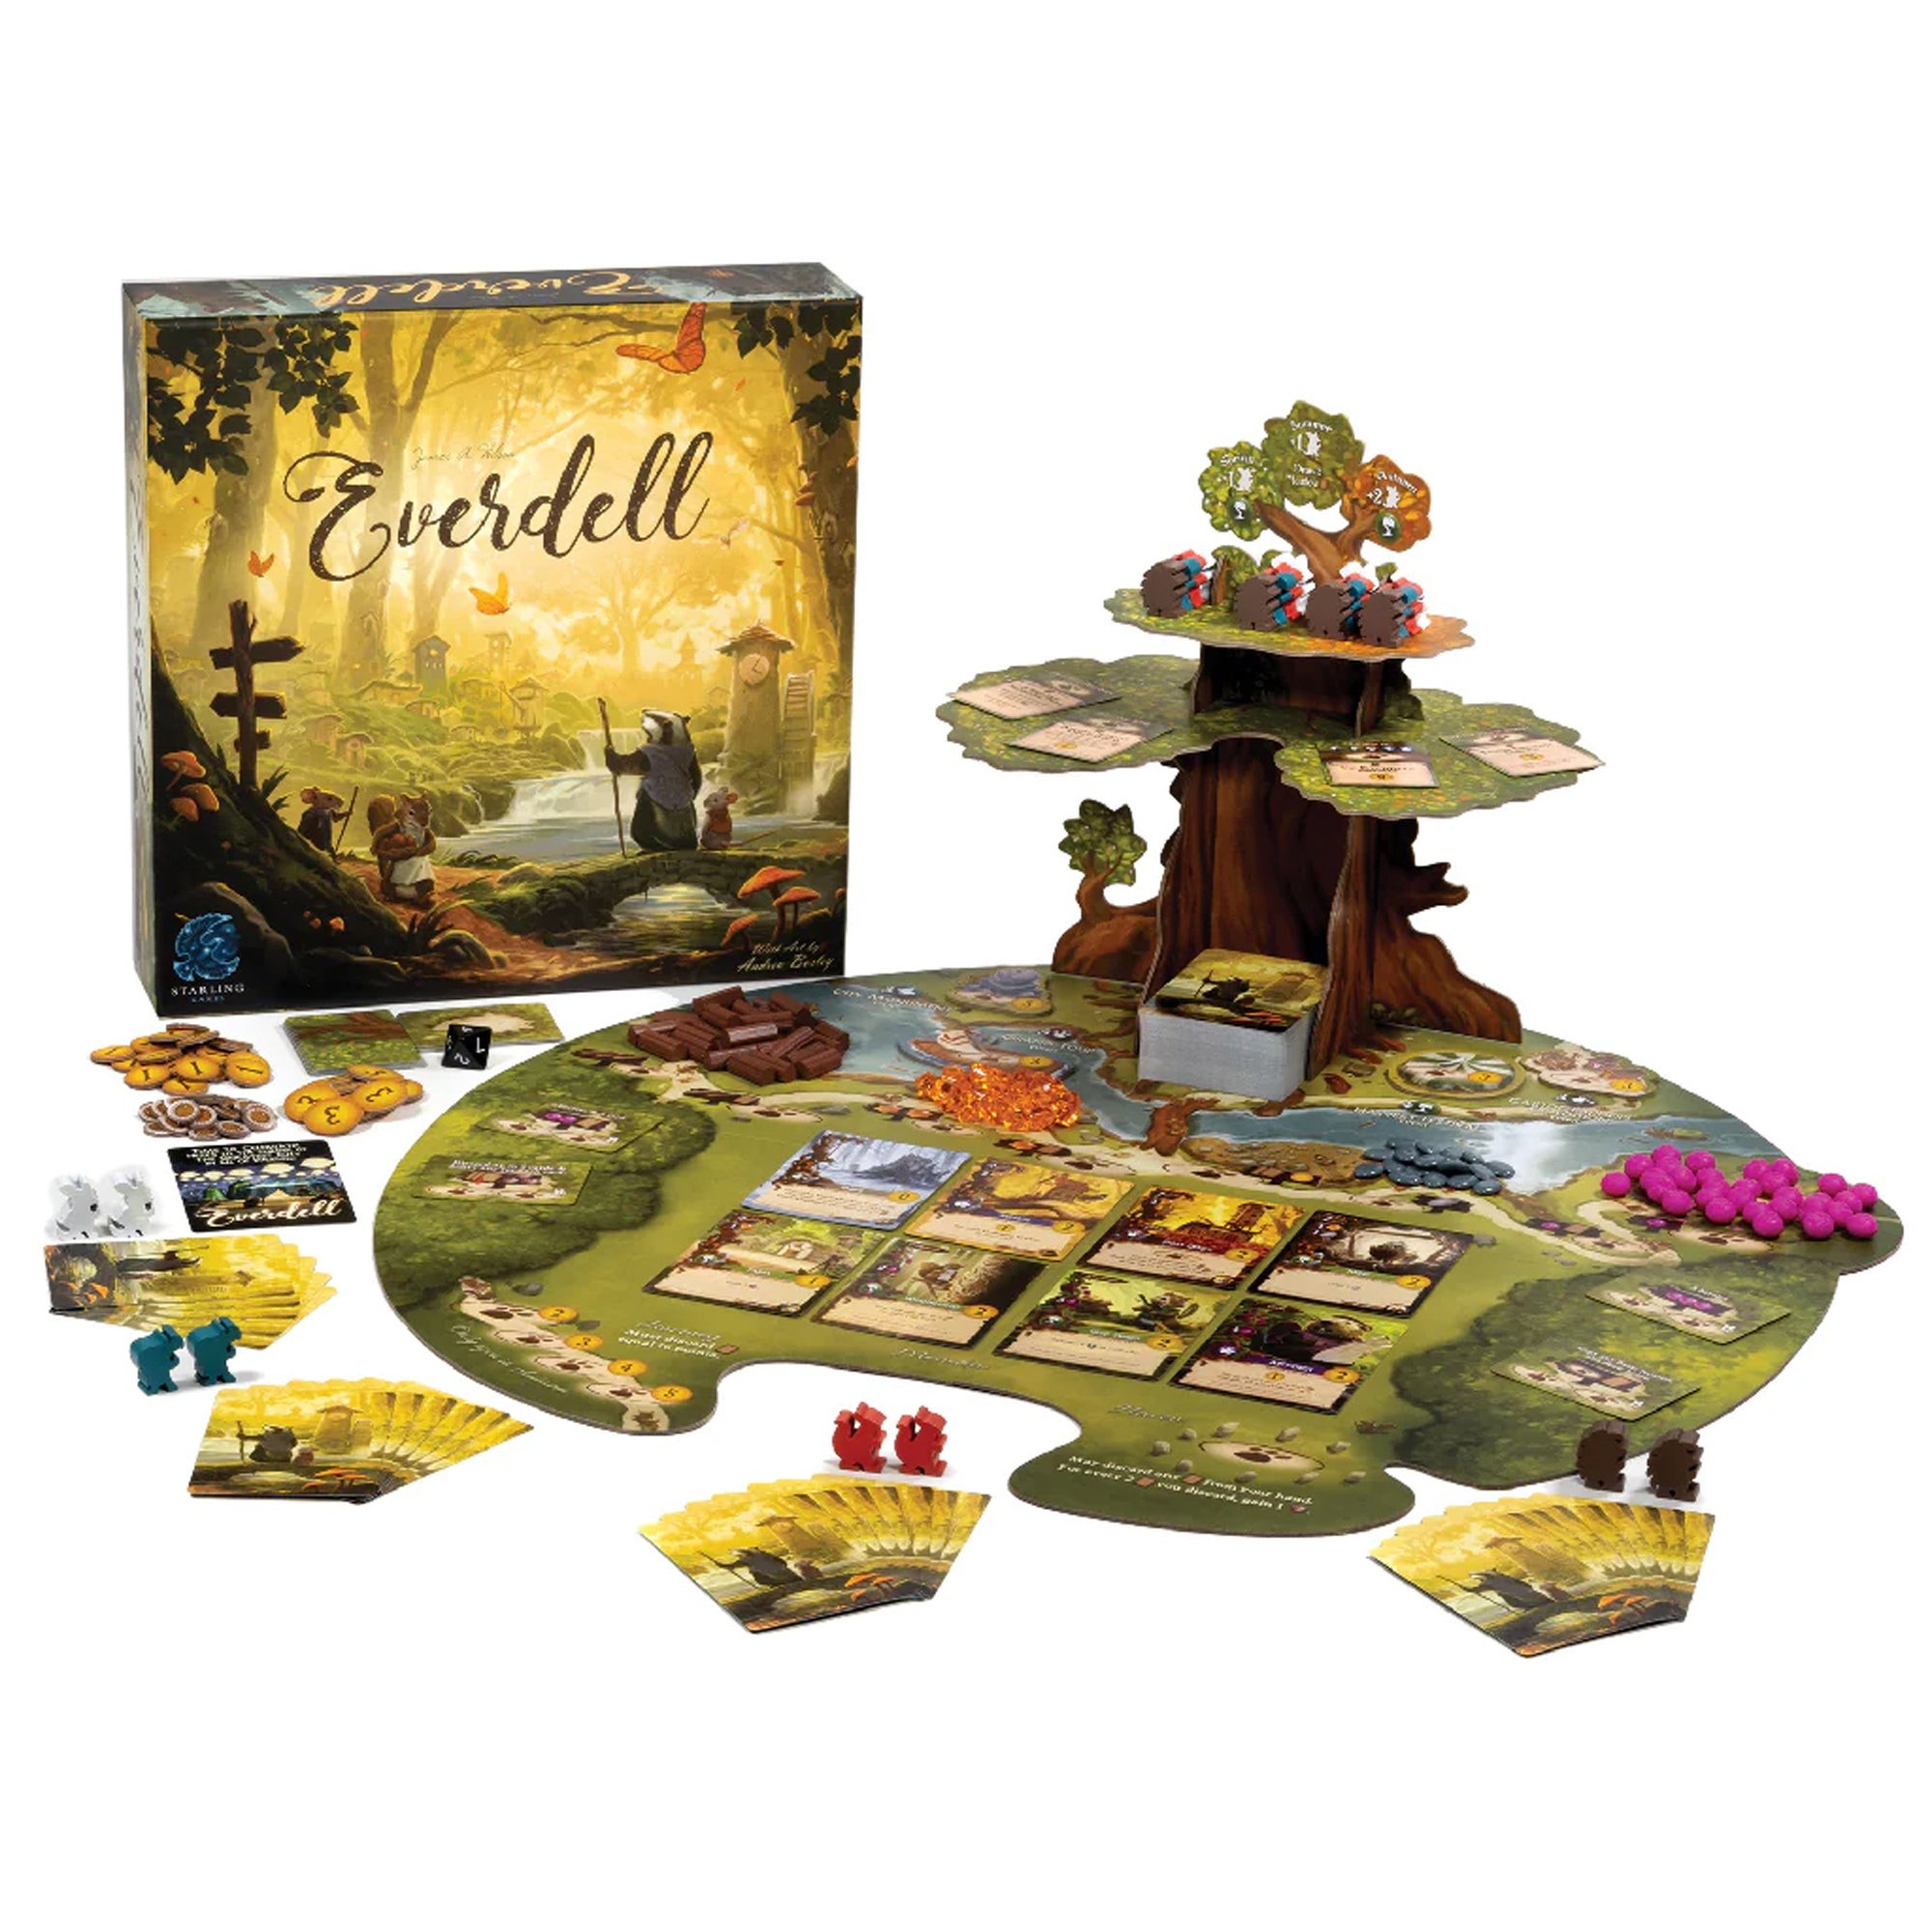 Everdell Board Game Ages 10+ Years